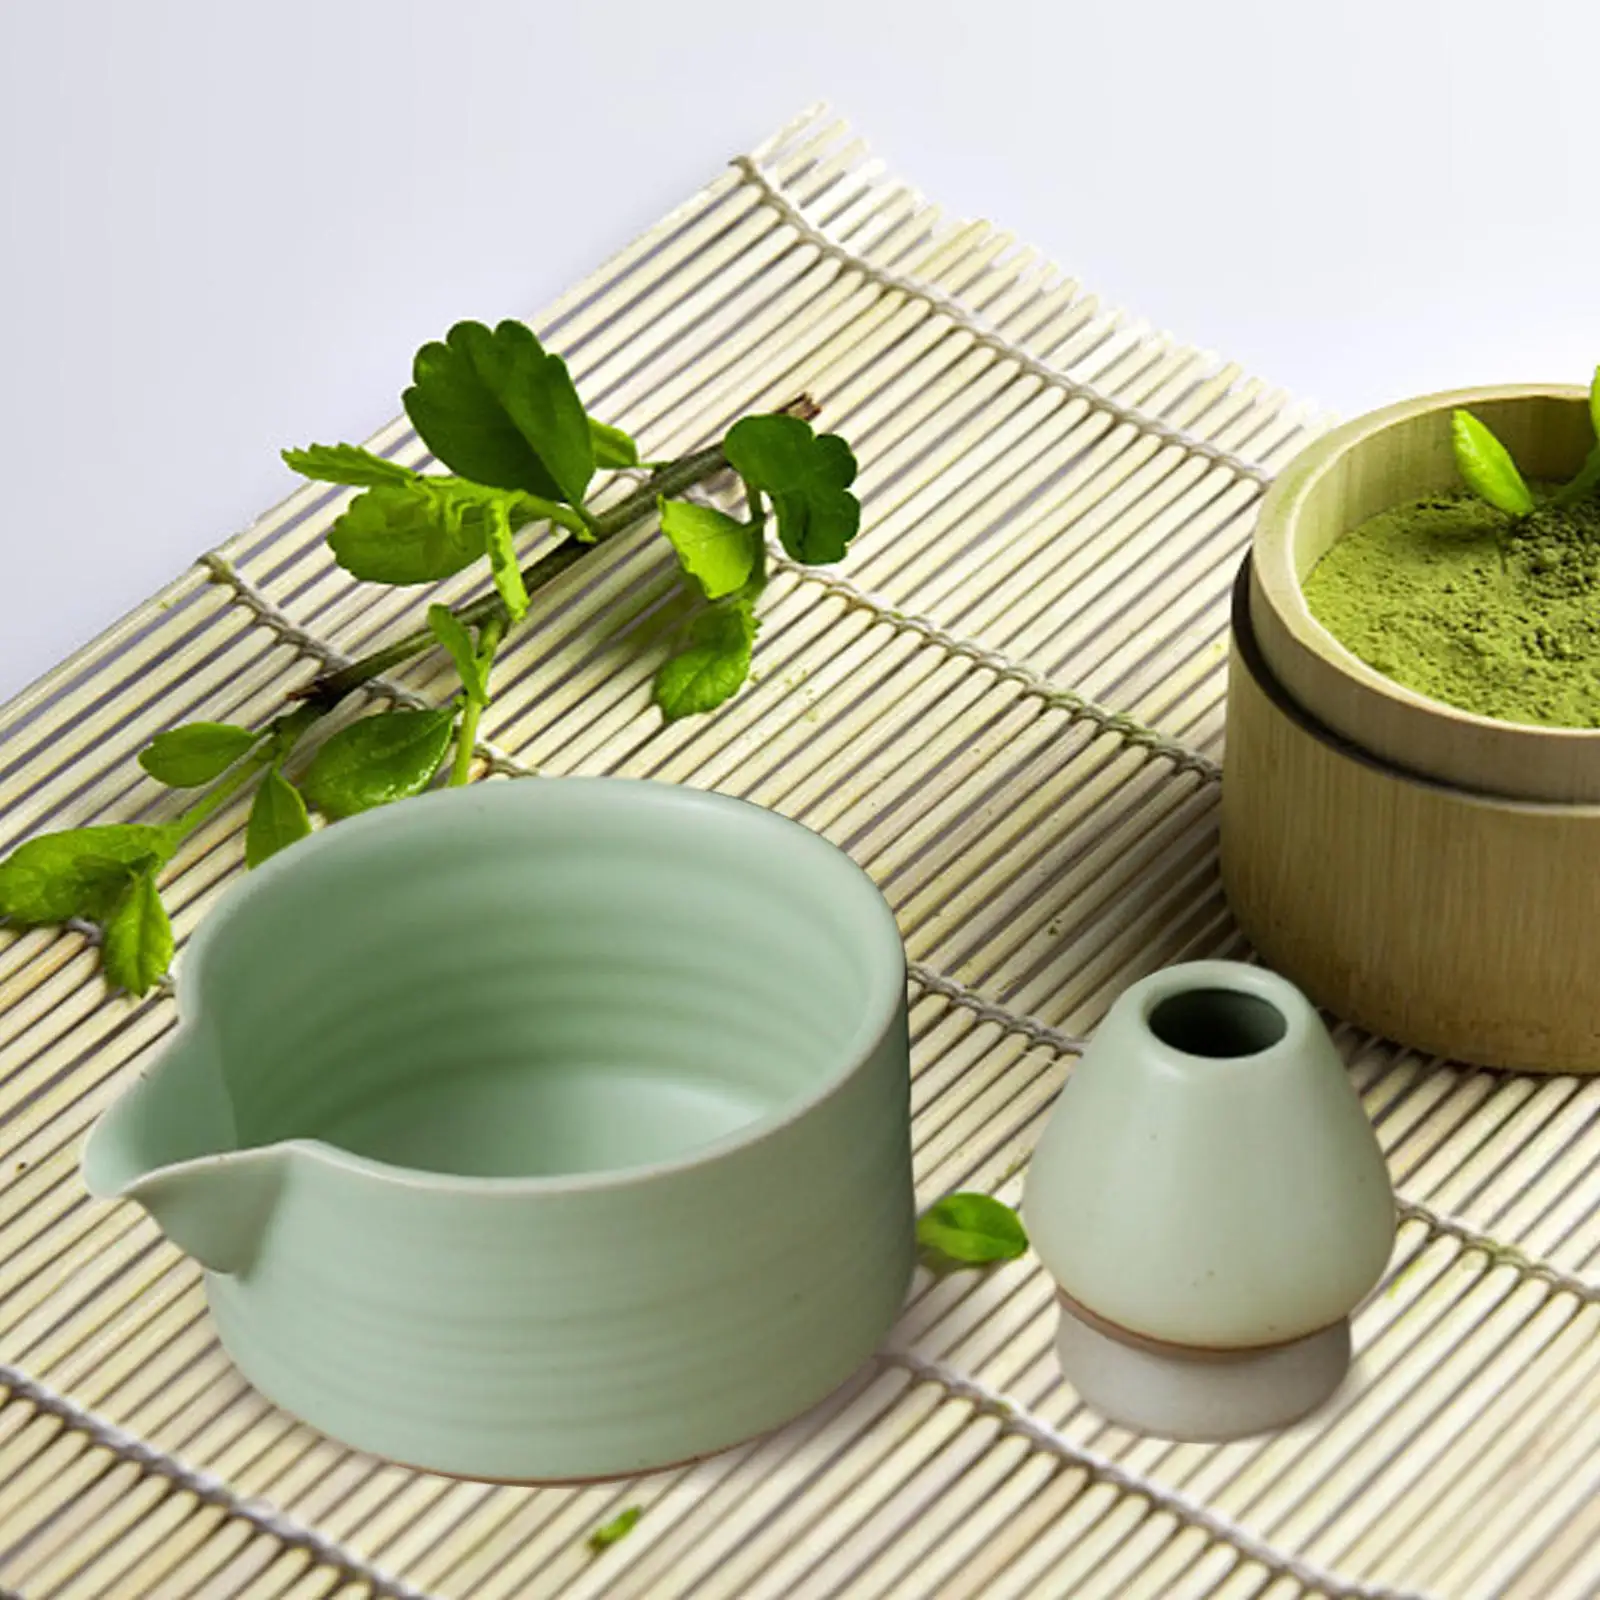 Matcha ceremony accessories for tea lovers and friends of the Japanese